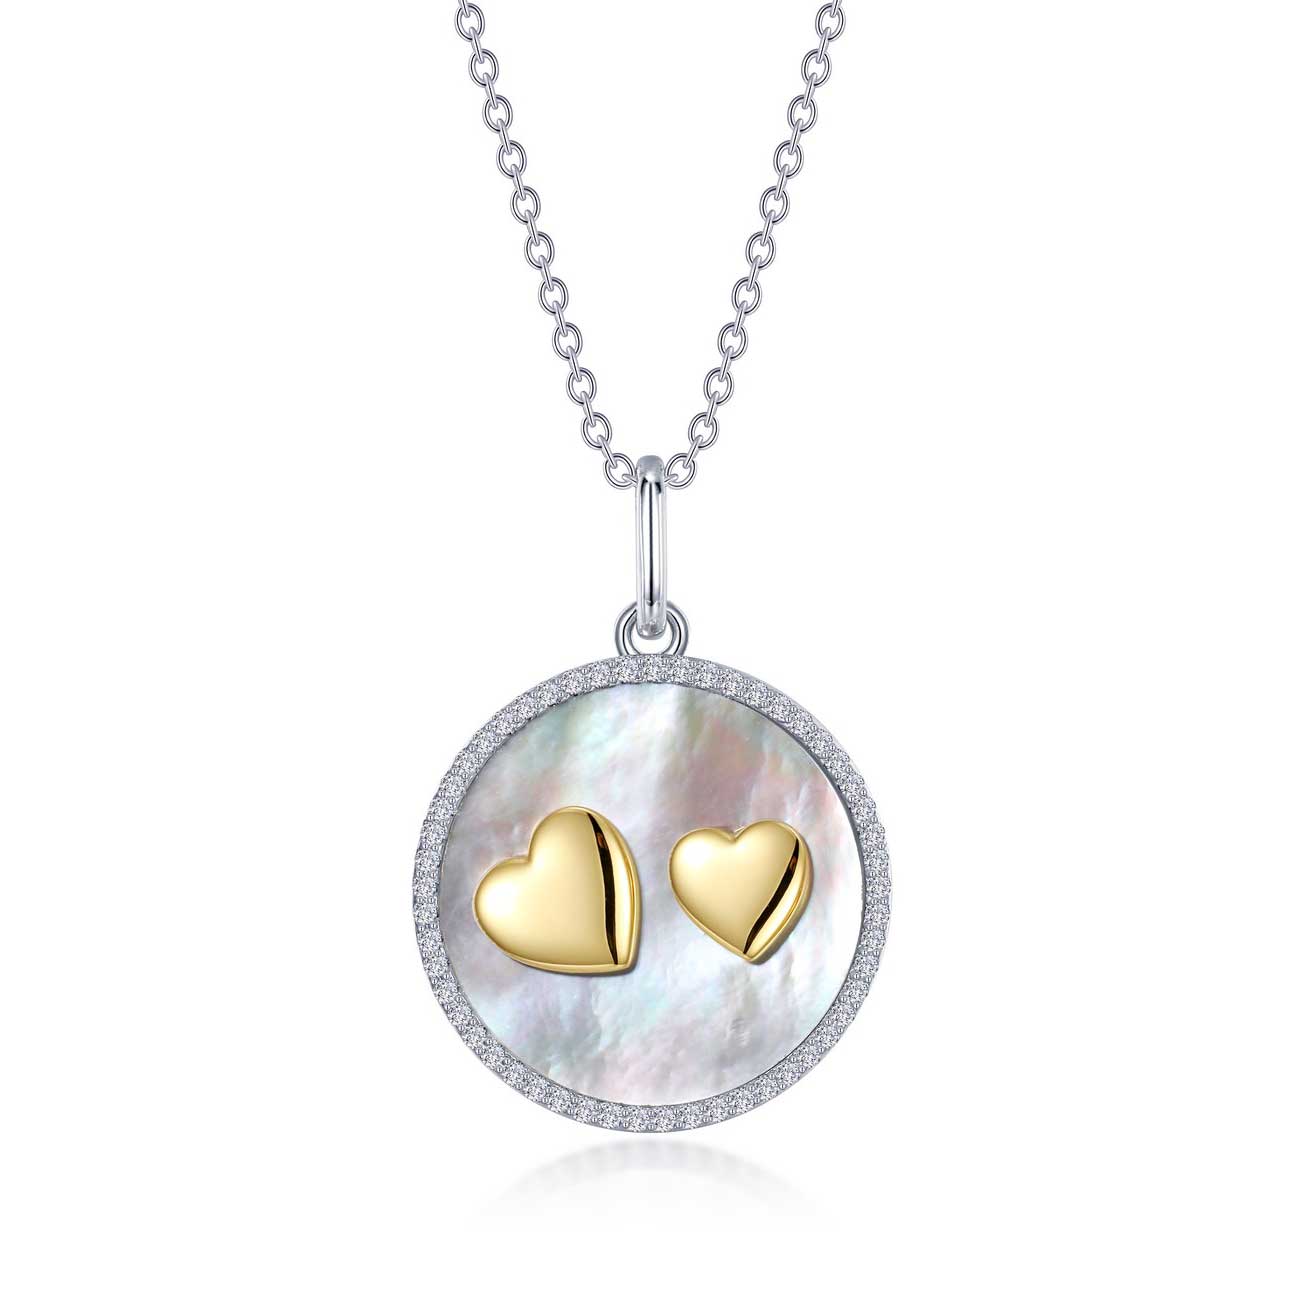 Lafonn Mother of Pearl Heart Necklace: Precious Accents, Ltd.